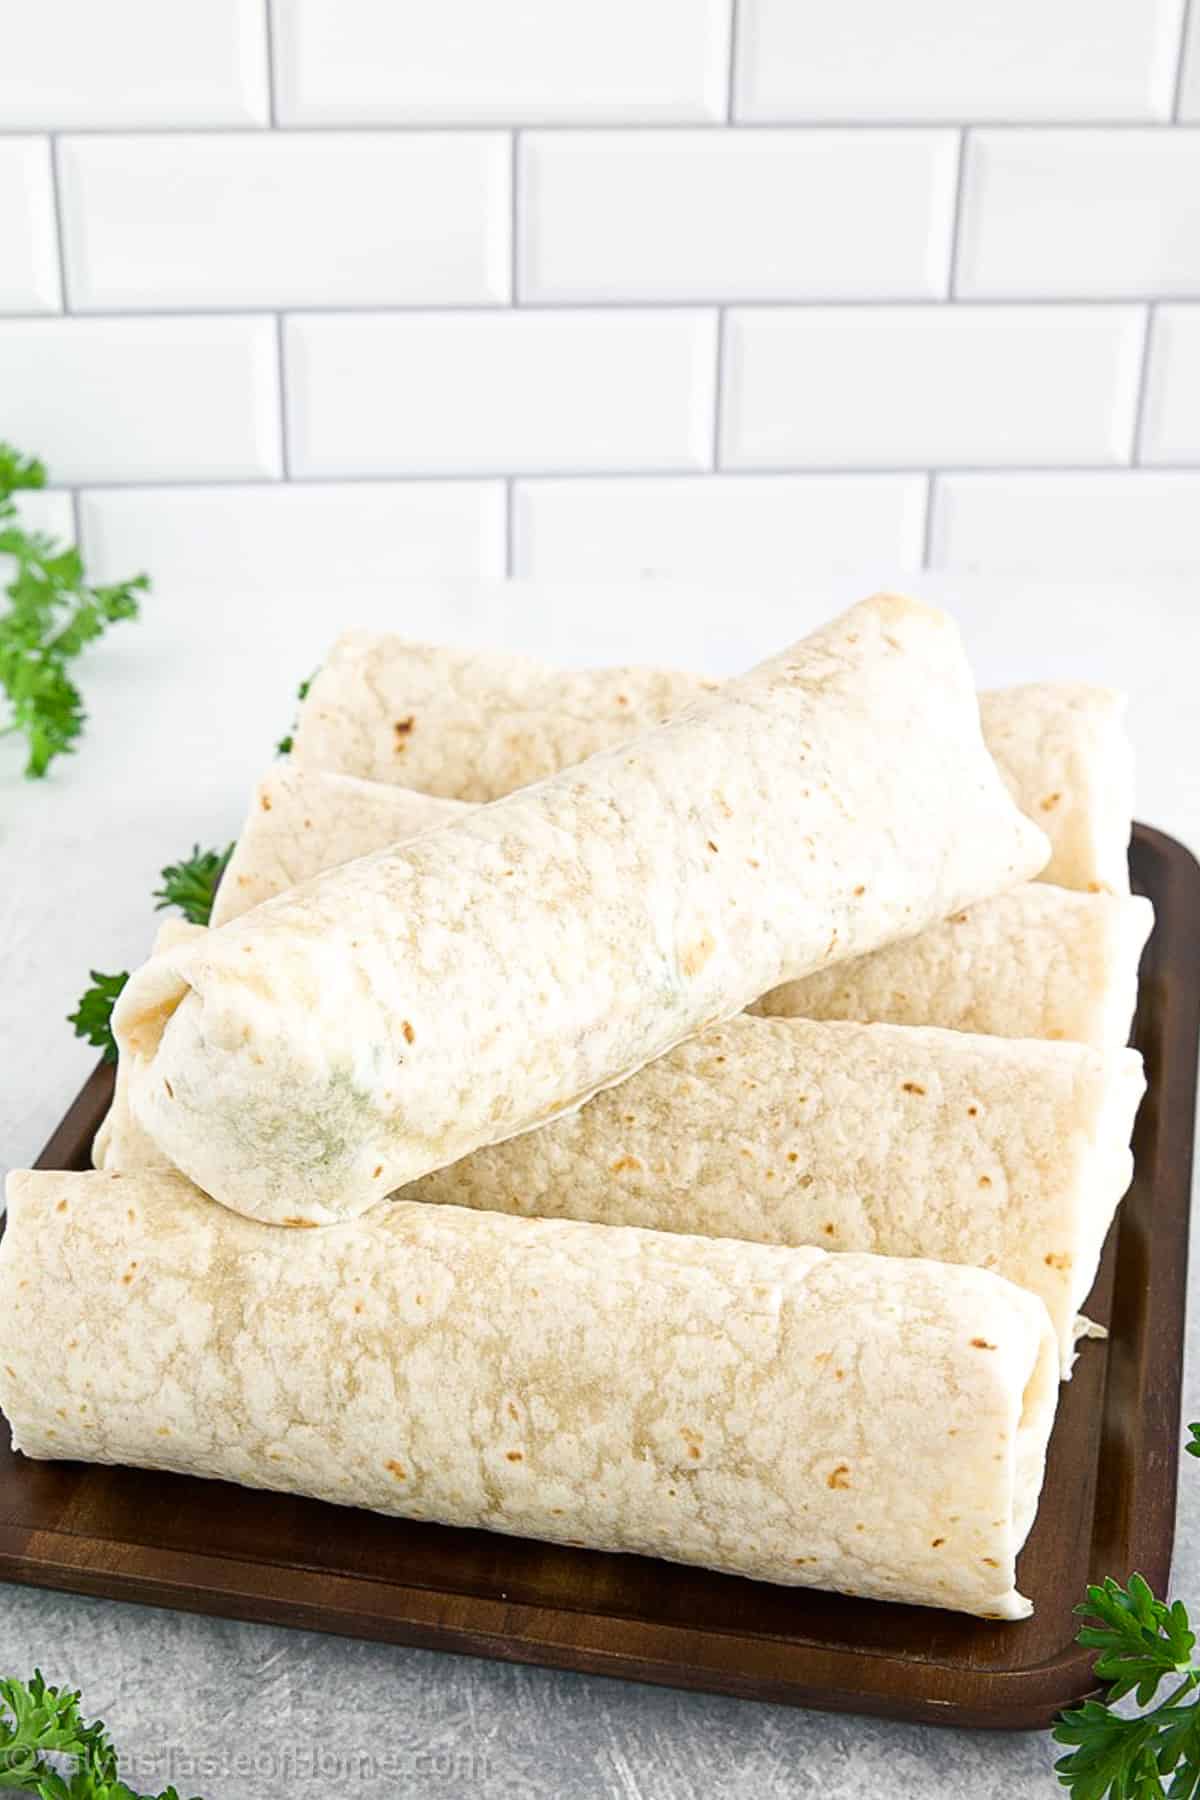 Caesar Salad Wraps are a delicious and convenient way to enjoy the classic Caesar salad. These wraps are made with a variety of ingredients, including lettuce, tomatoes, Parmesan cheese, and Caesar dressing.